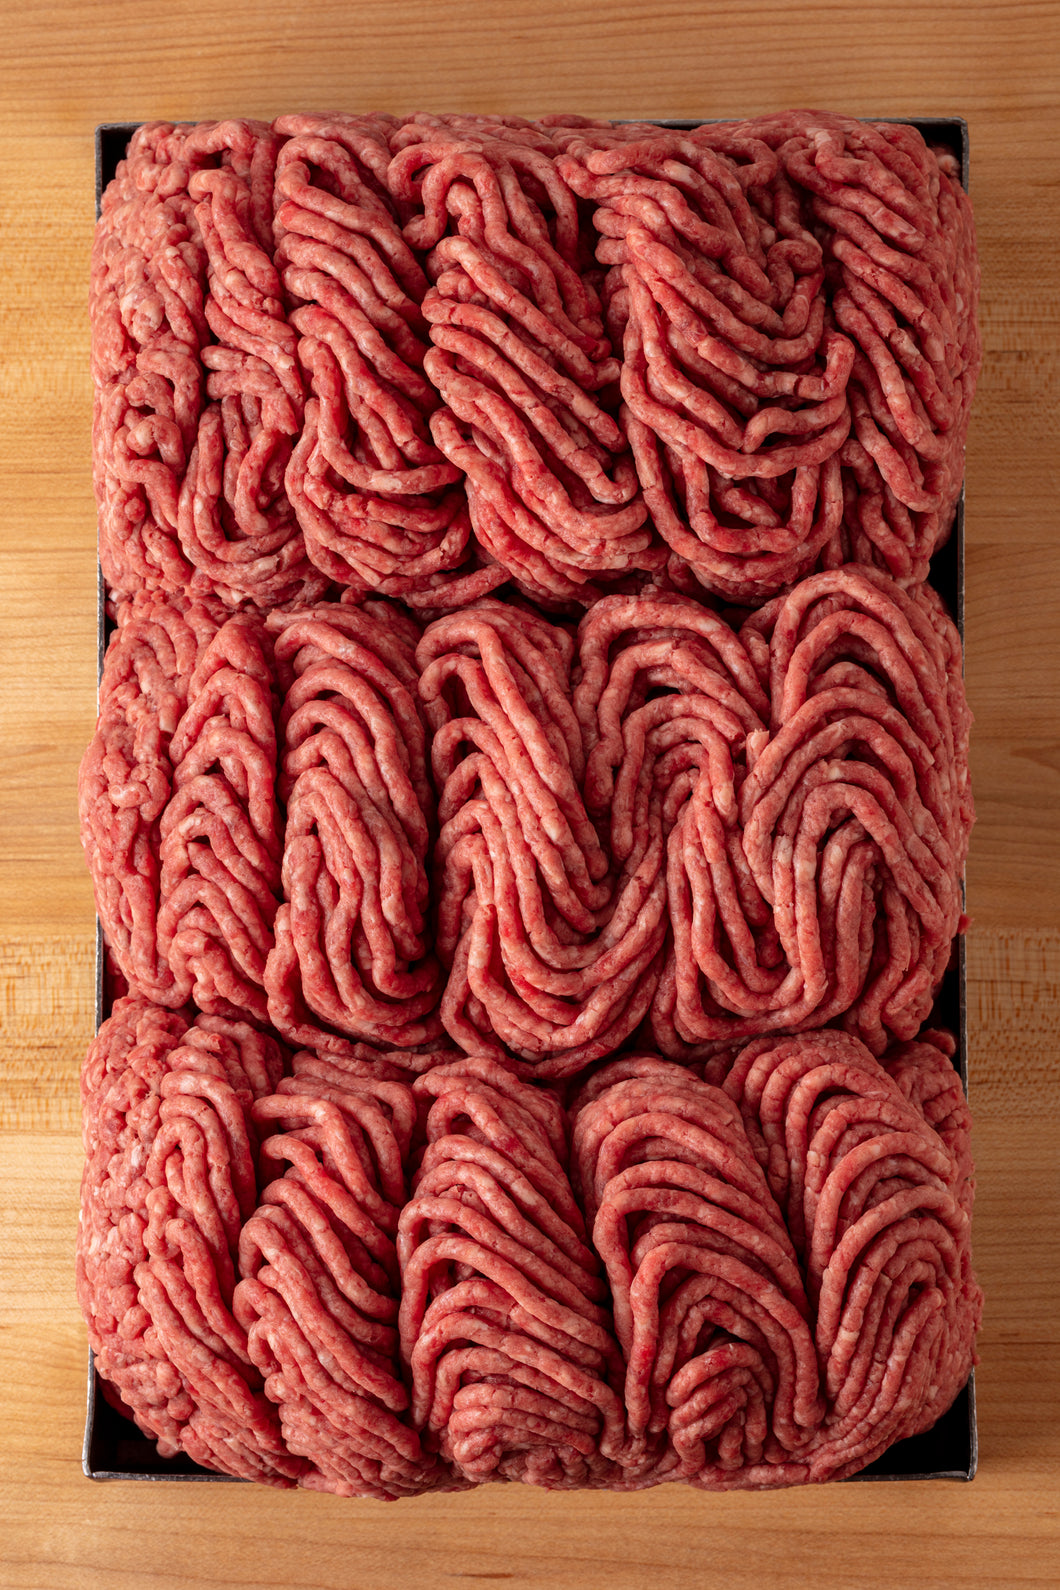 Butchery Blend Ground Beef by the lb